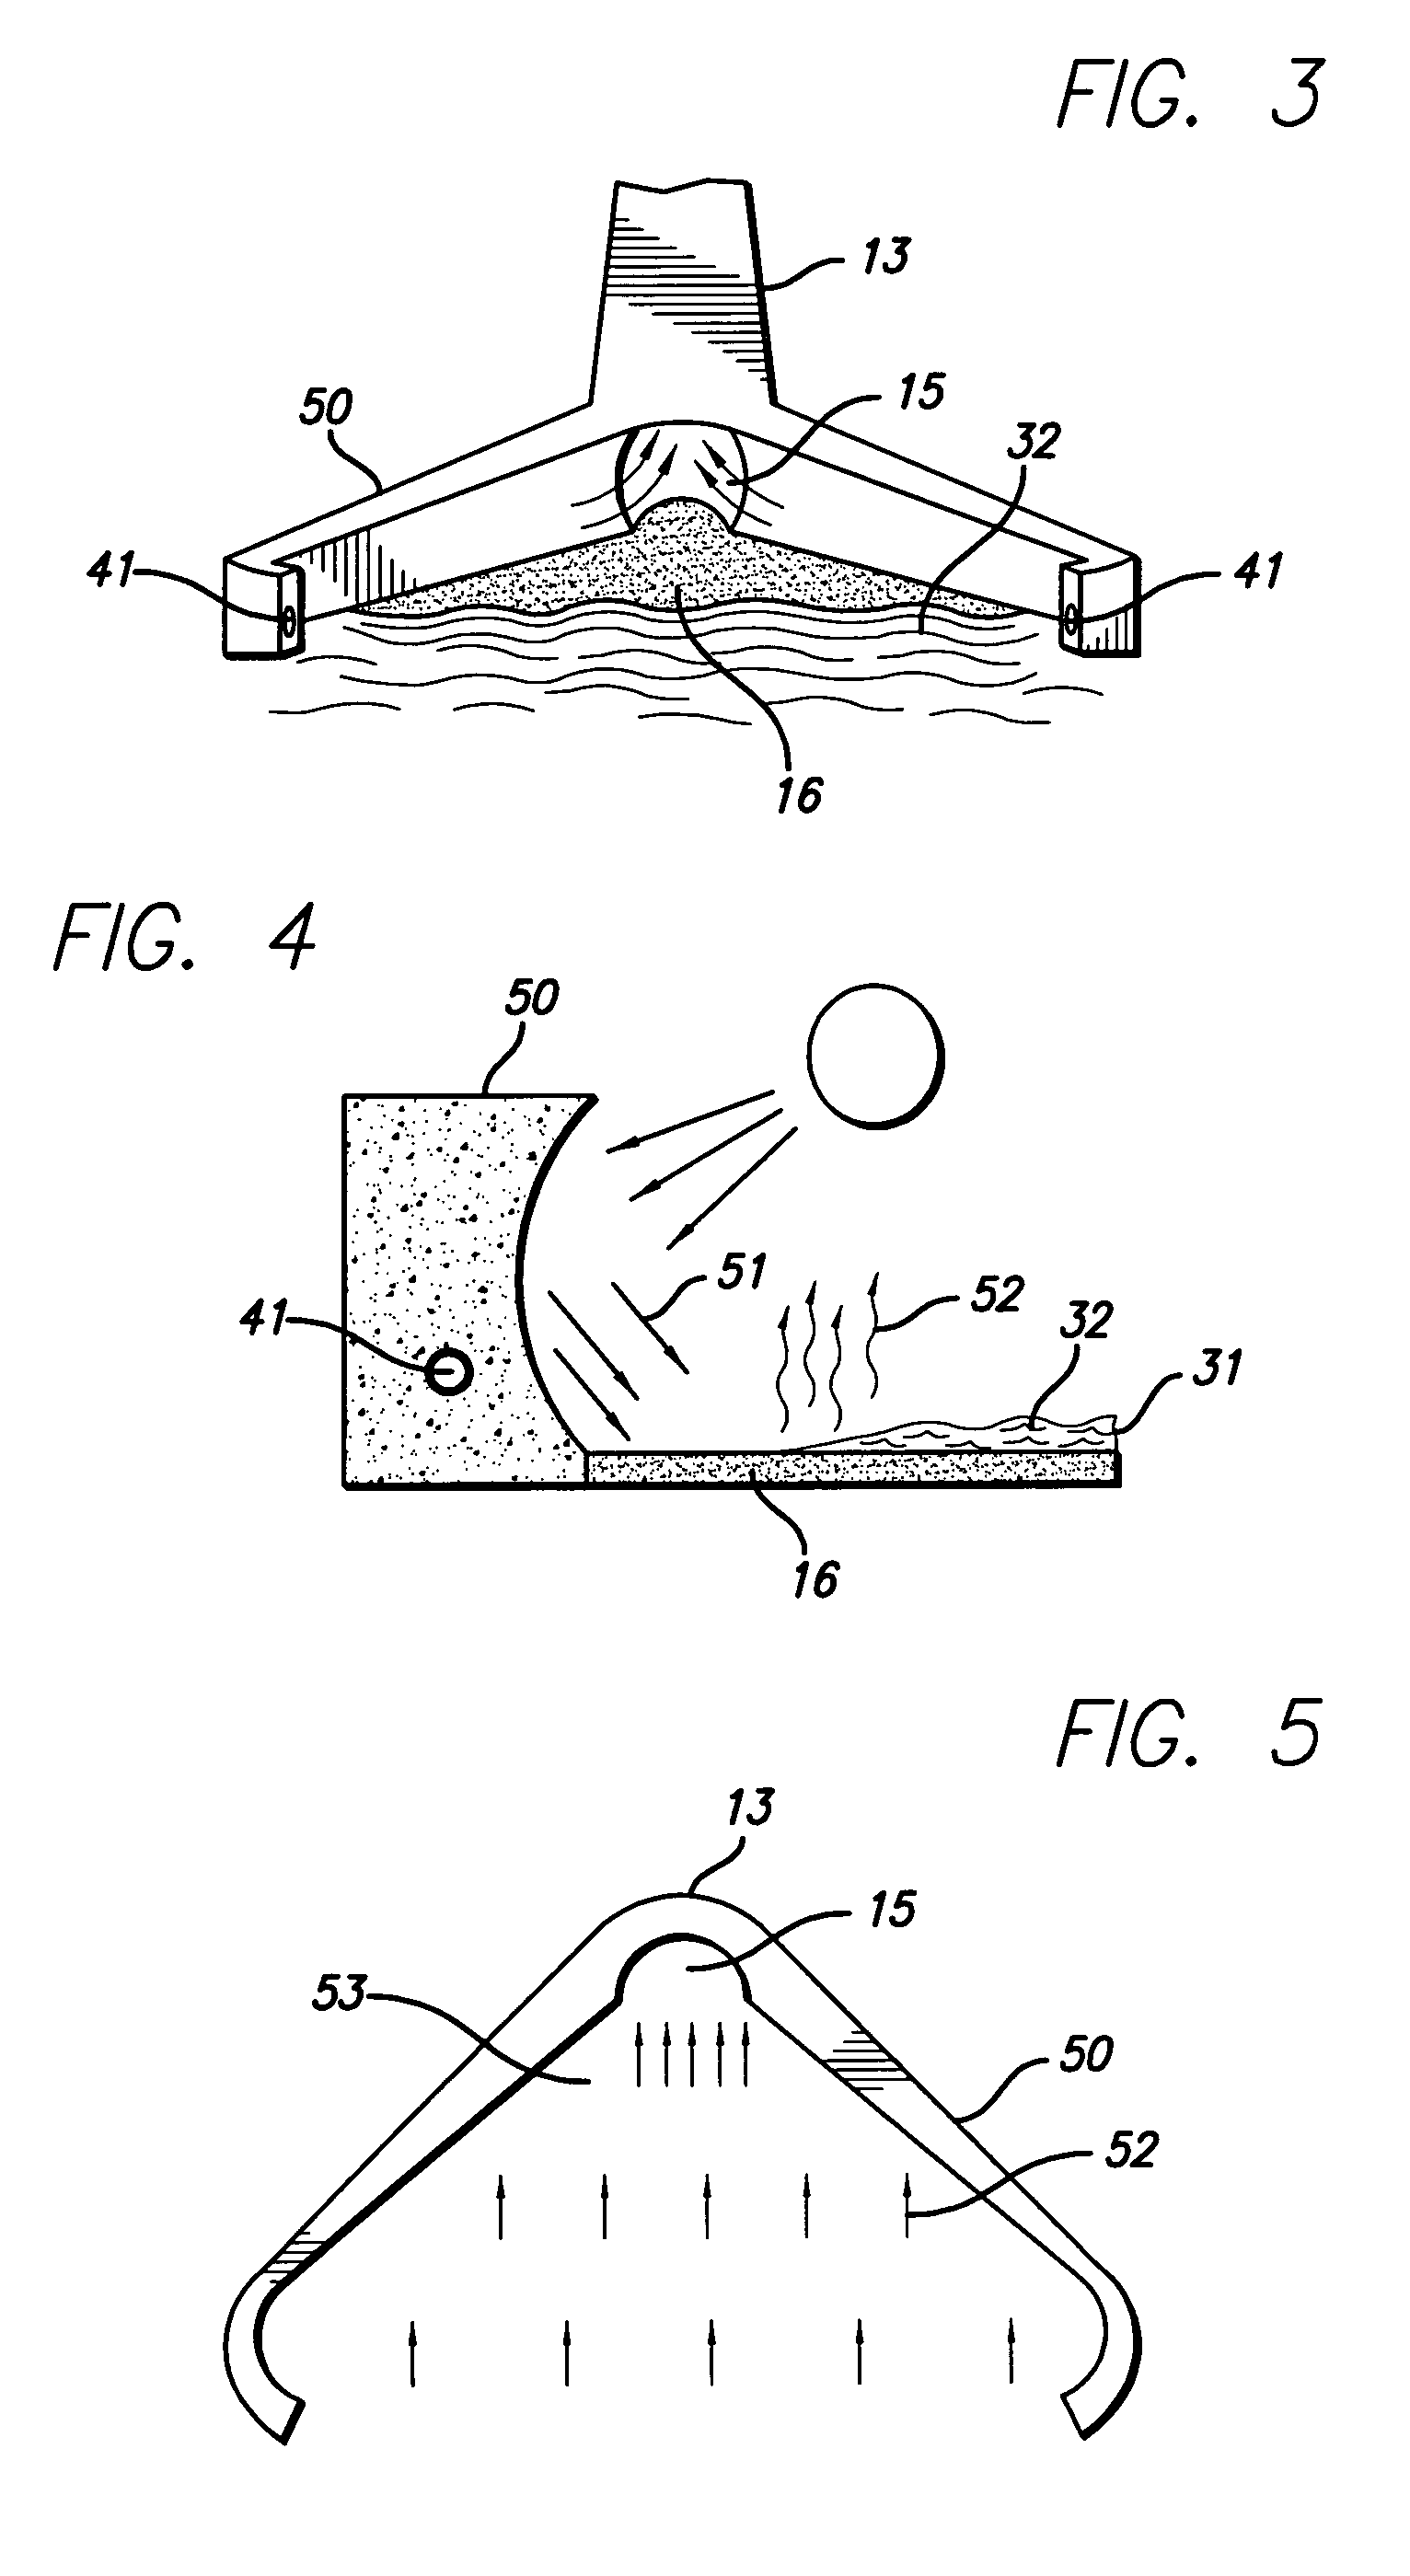 Process and structure for superaccelerating nature, producing a continuous supply of fresh water from salt water by using solar, wind, and wave energy